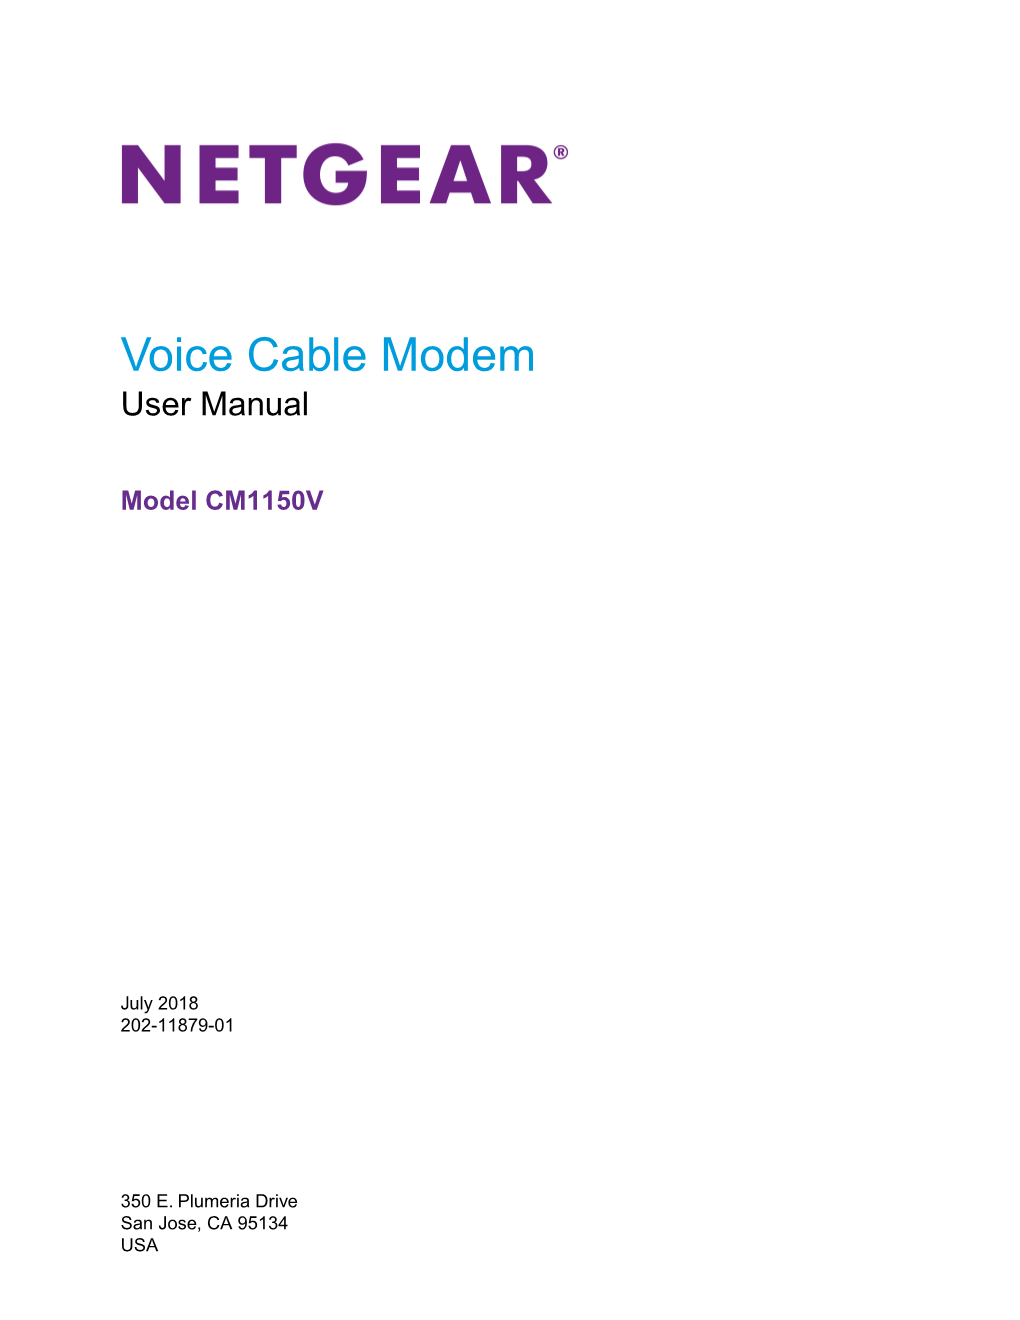 Voice Cable Modem User Manual